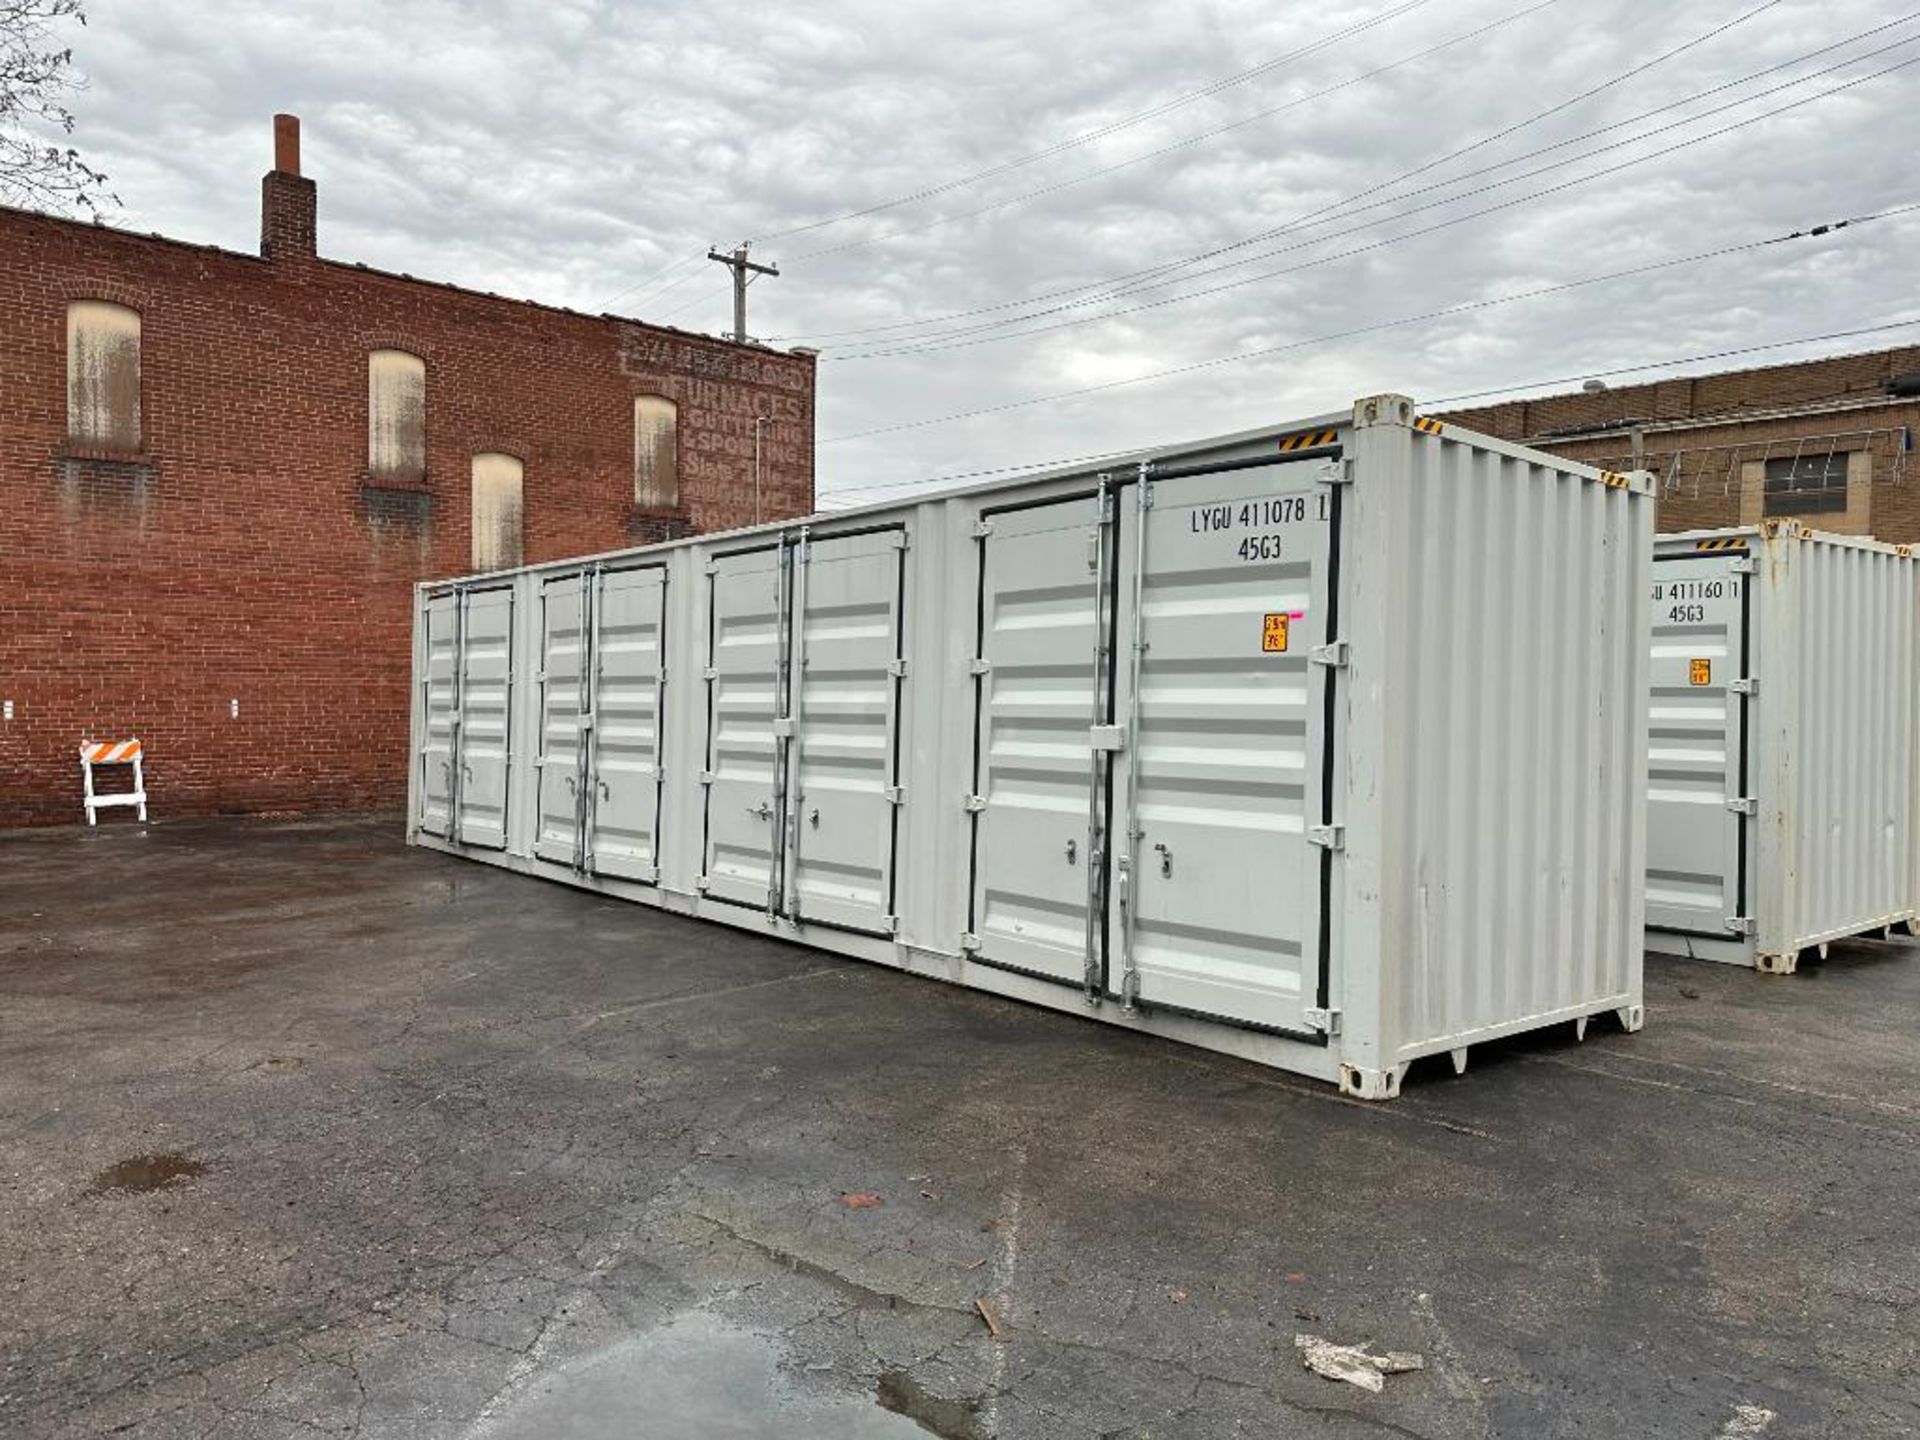 2022 40FT MULTI-DOOR SHIPPING CONTAINER BRAND/MODEL: LYGU 45G3 INFORMATION: NEW,2022 STORAGE CONTAIN - Image 5 of 23